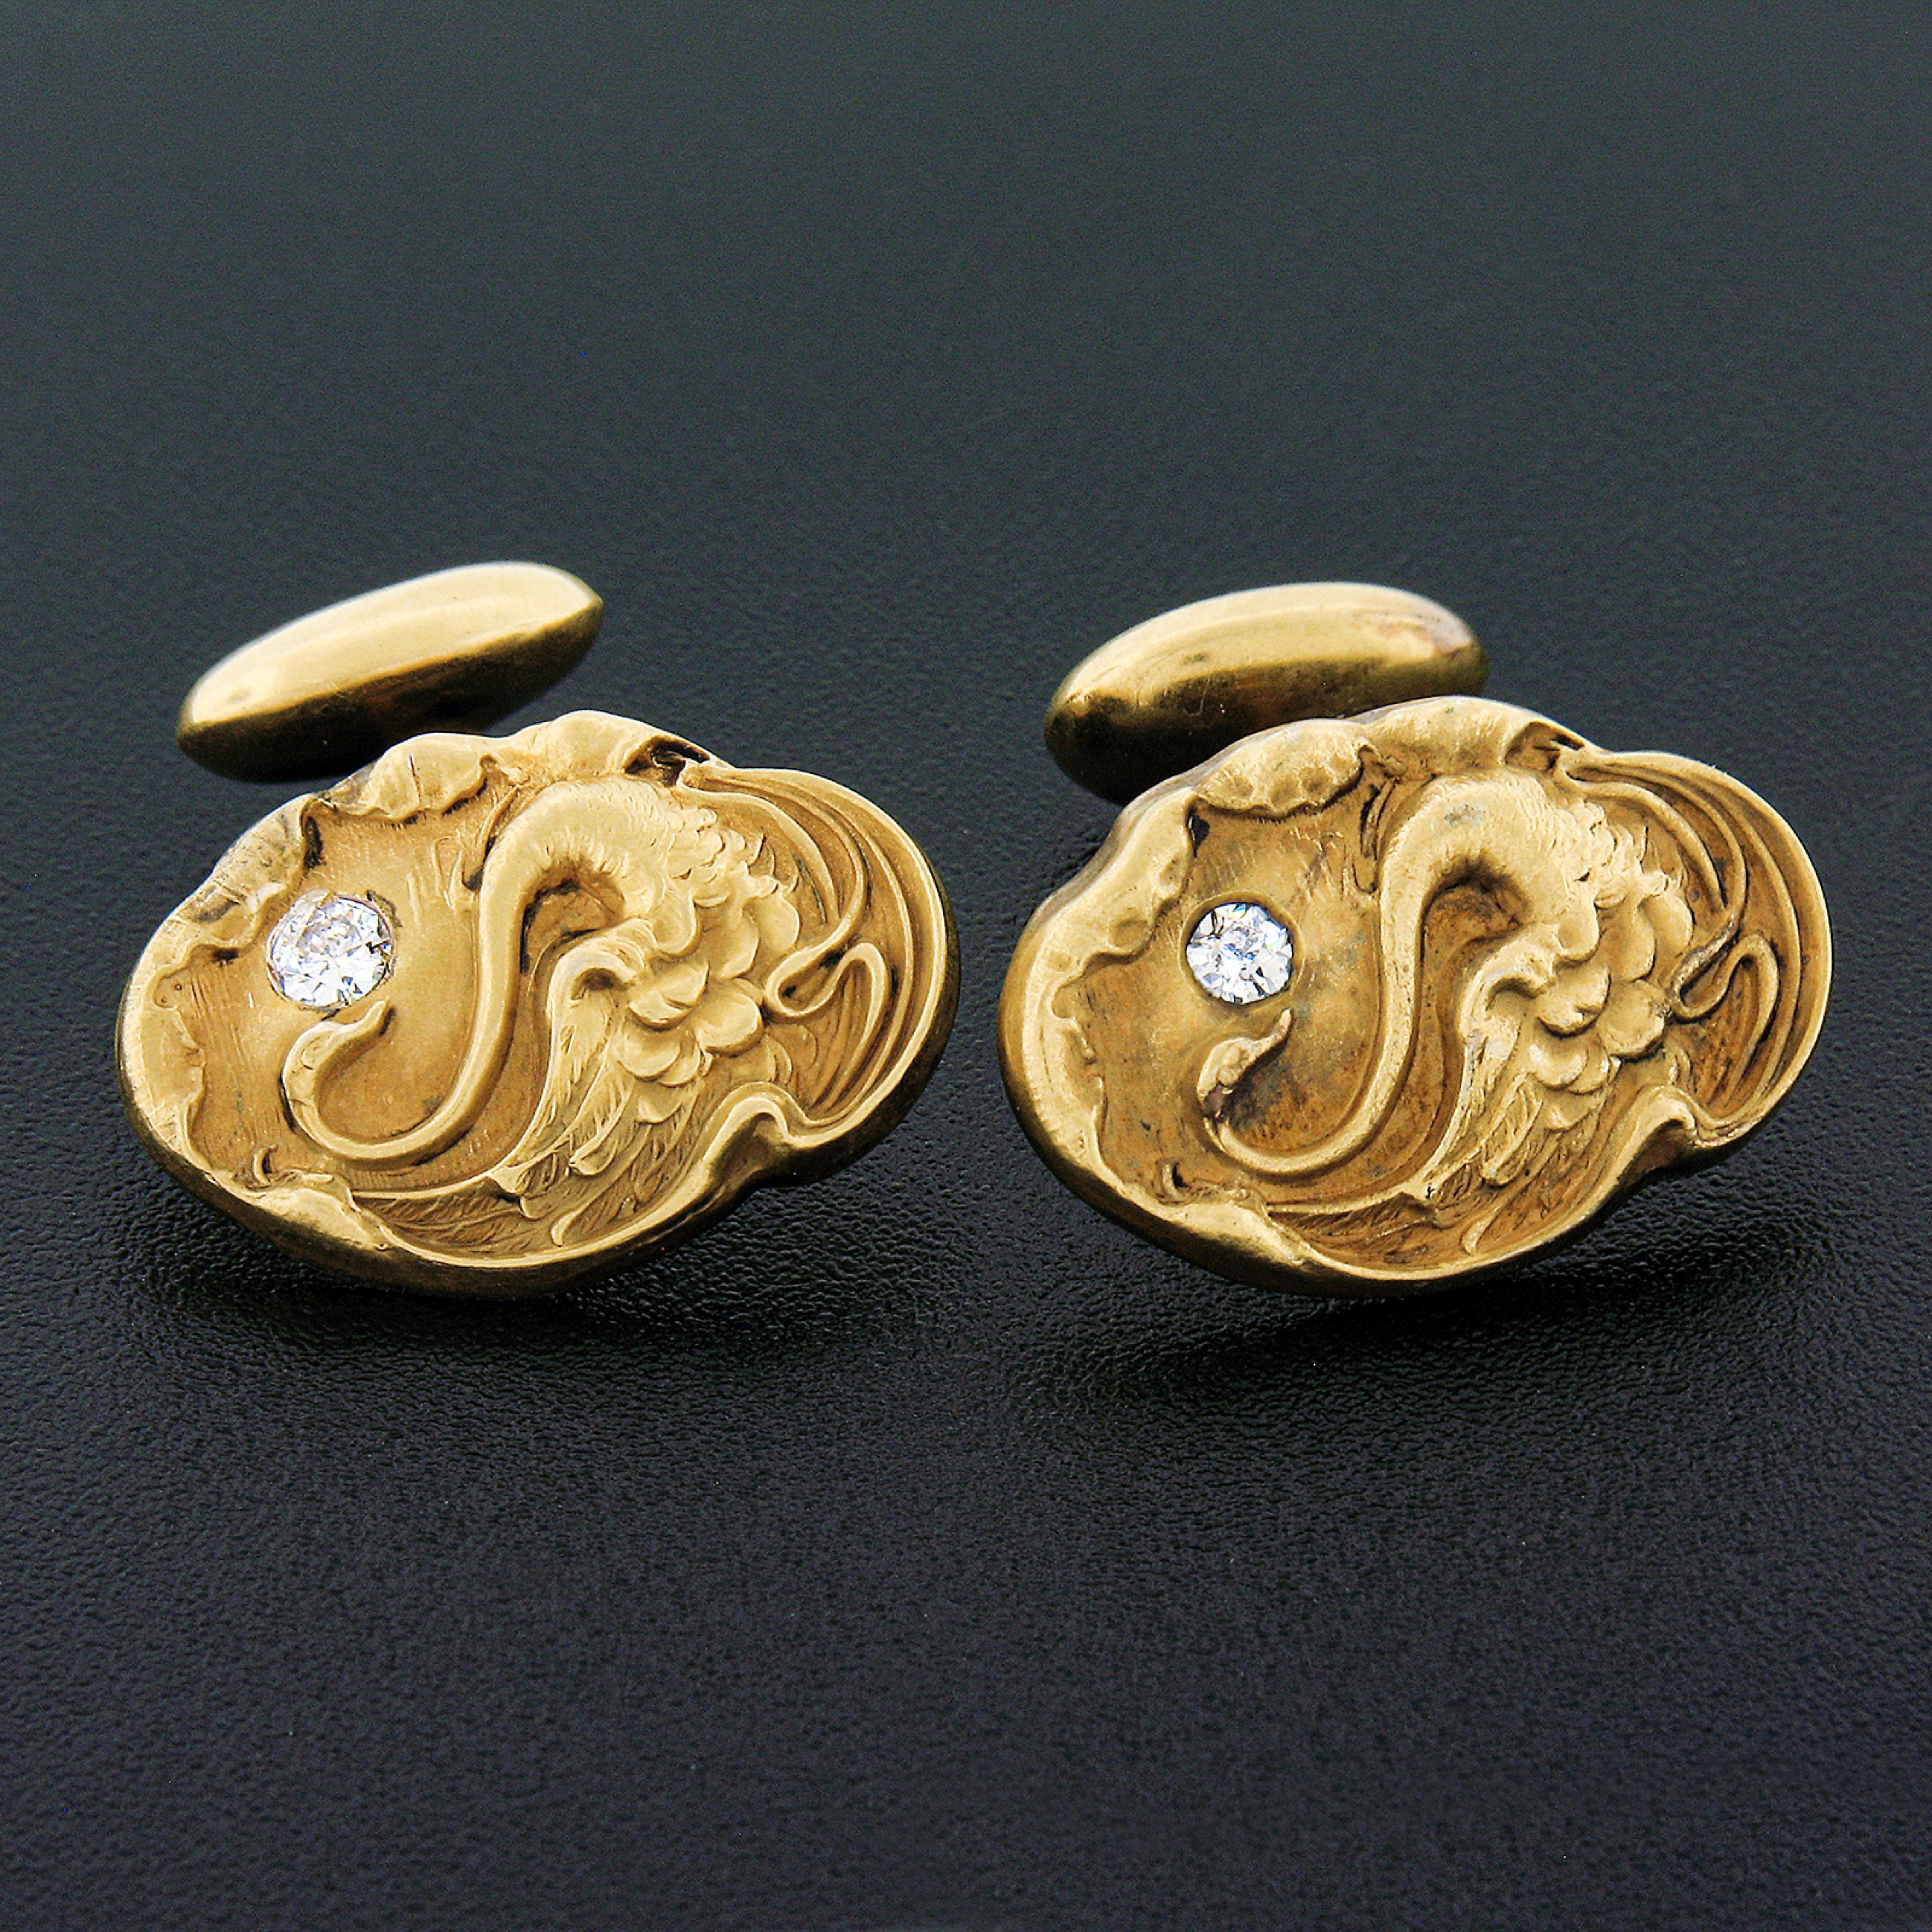 These fine art nouveau period cuff links are crafted in solid 14k yellow gold and feature absolutely spectacular detailing throughout their front panel showing a lovely swan repousse work design that gives the pair a truly outstanding look. Each